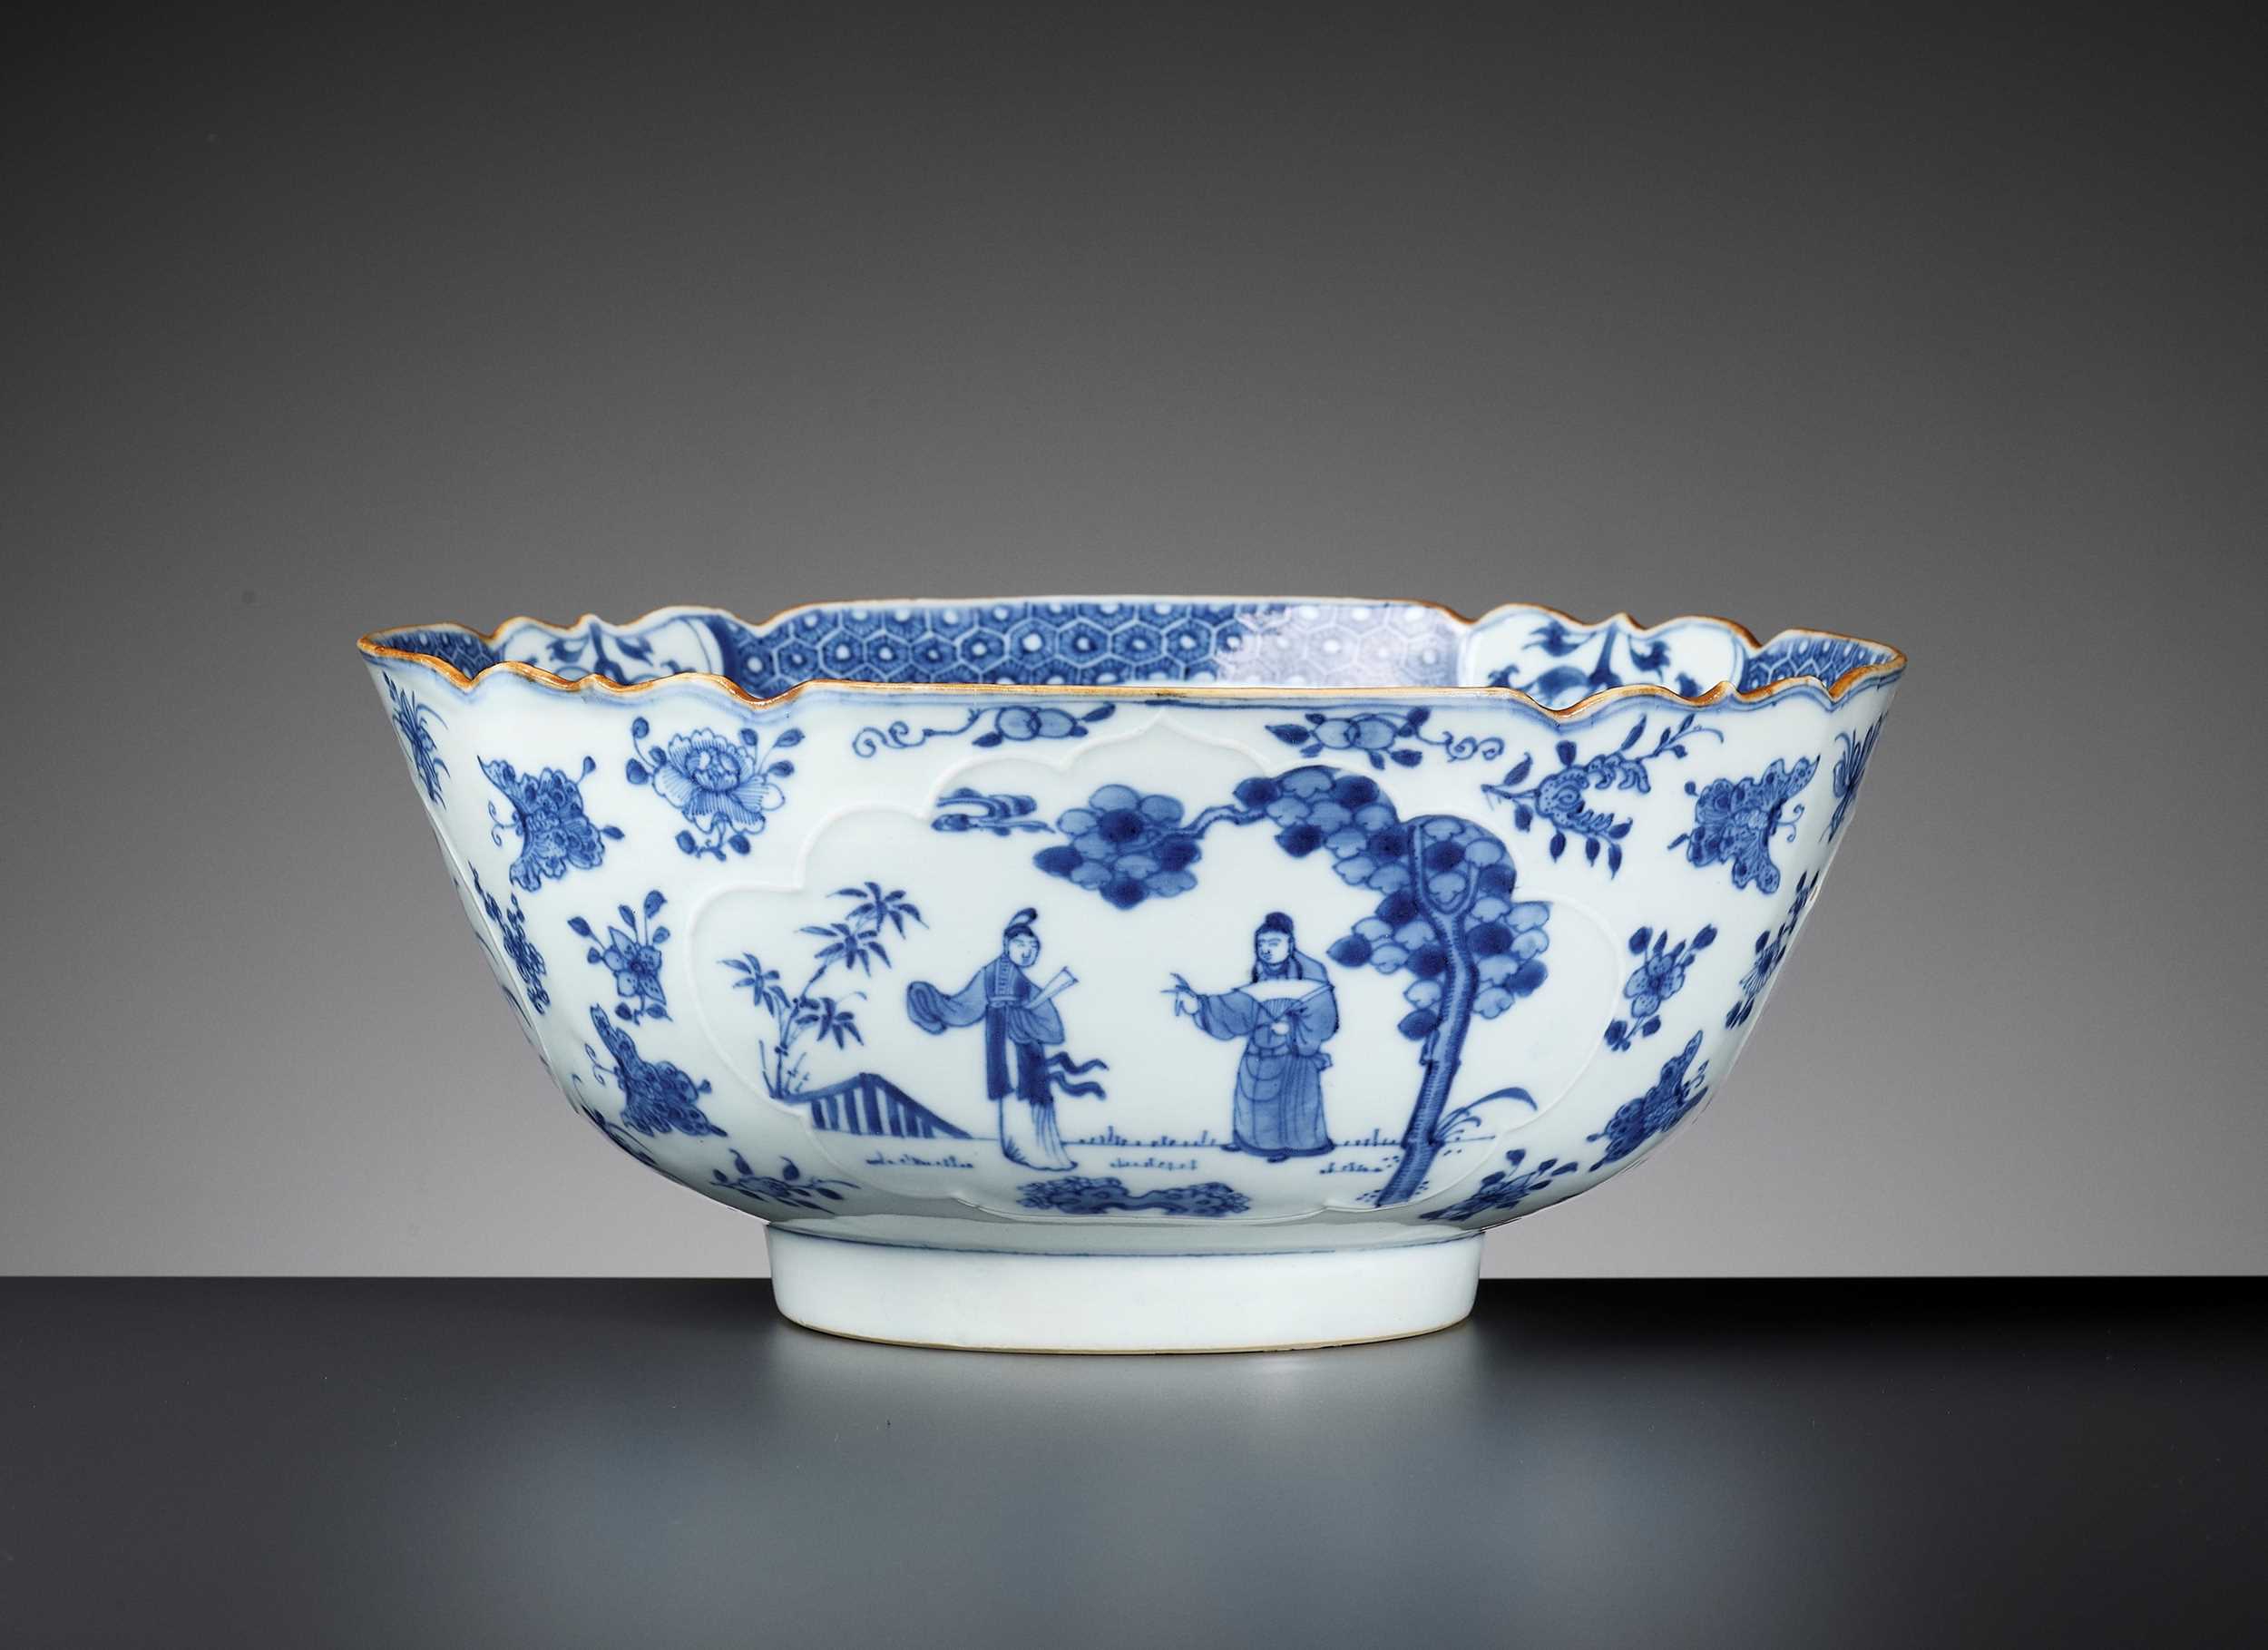 Lot 427 - A BLUE AND WHITE PORCELAIN BOWL WITH FLOWERS AND BUTTERFLIES, QIANLONG PERIOD